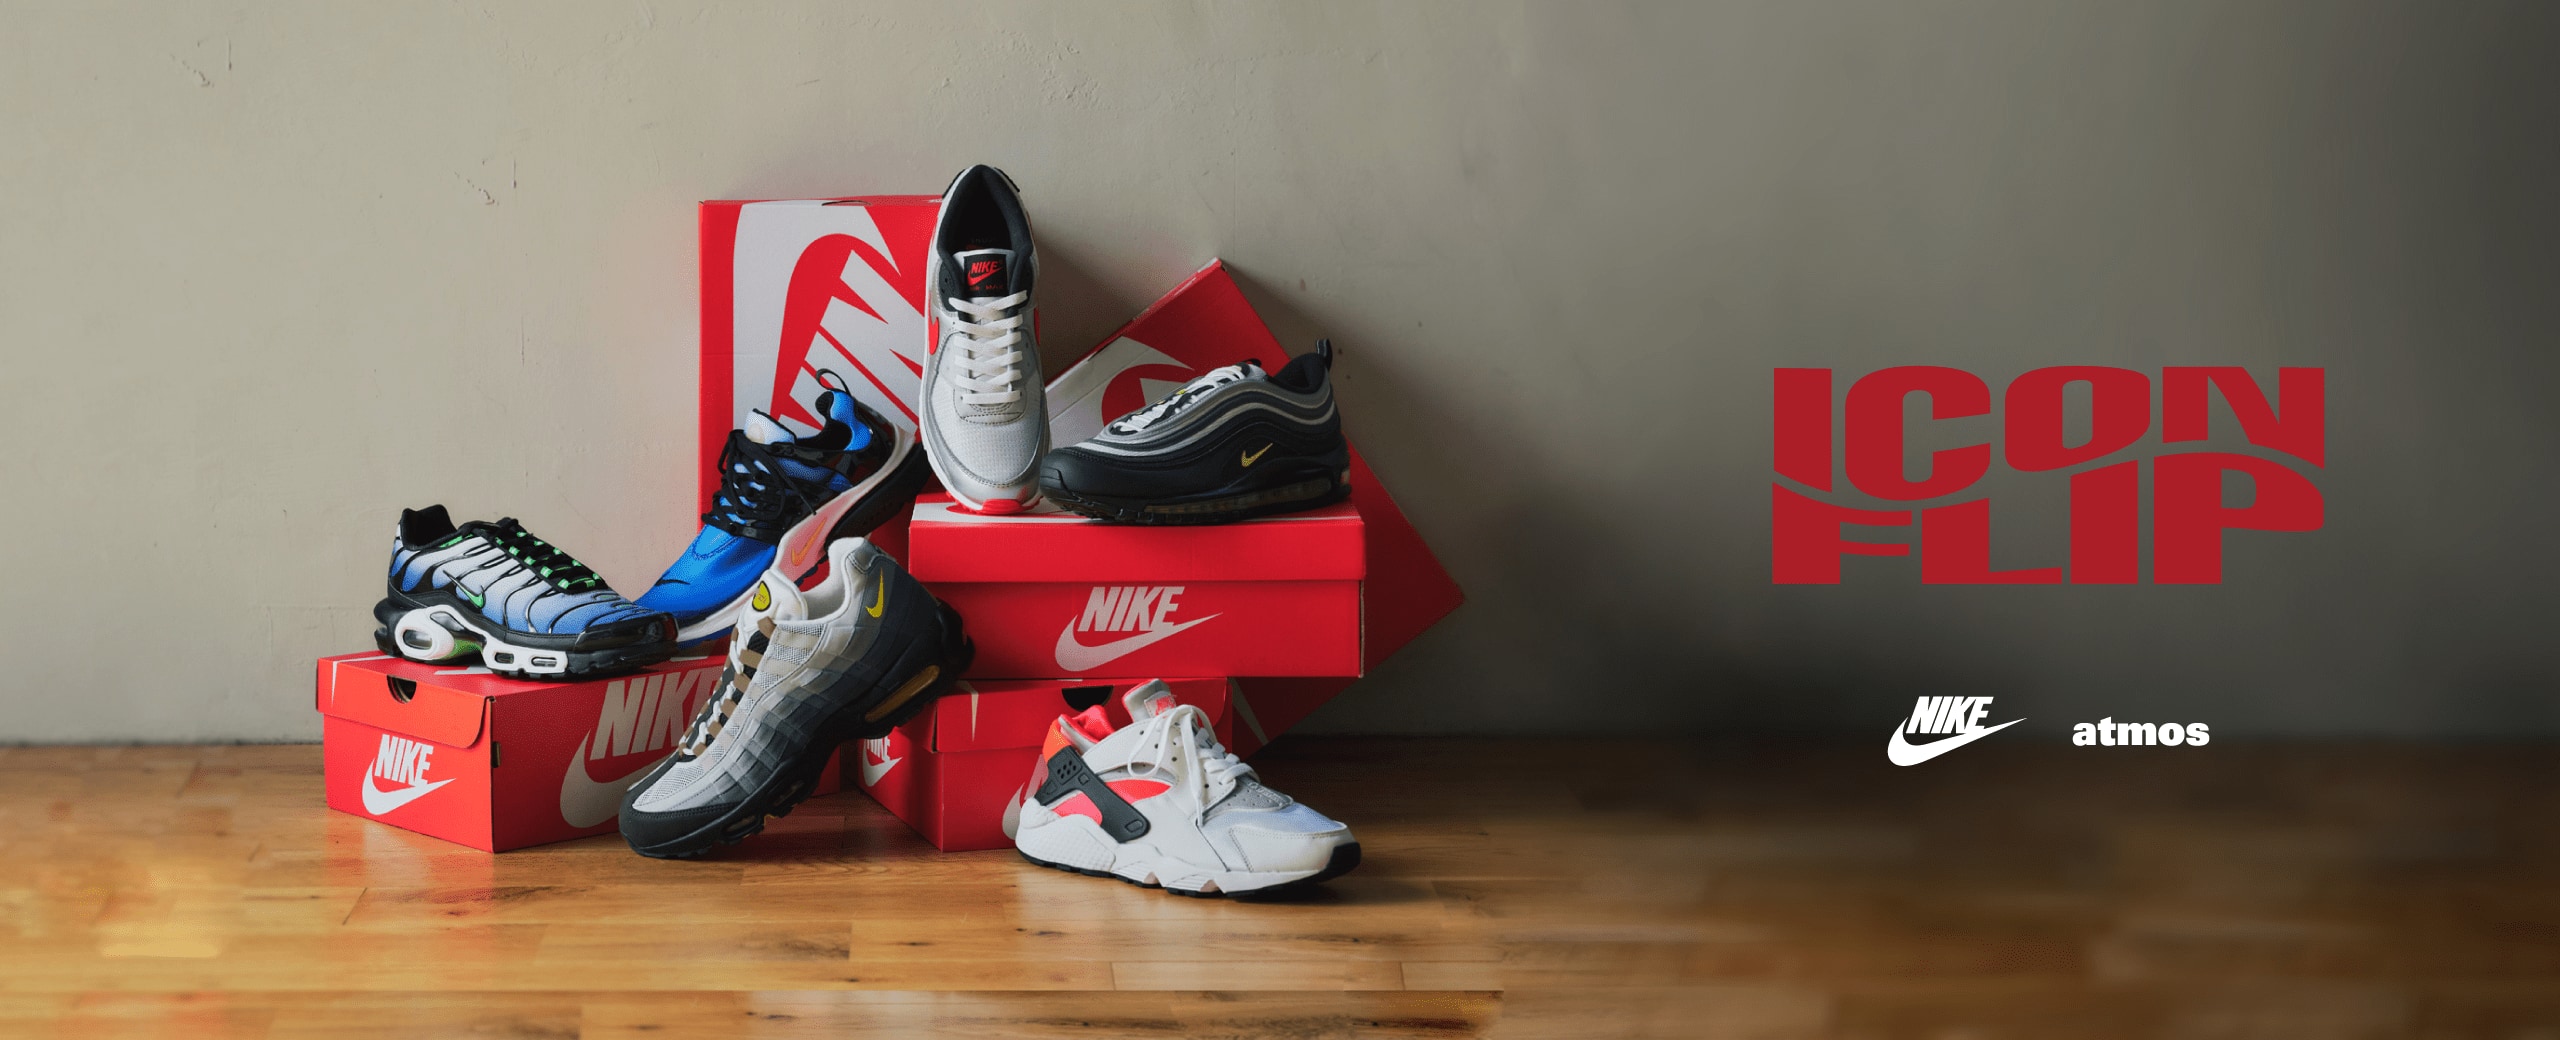 nike-icon-flip-collection